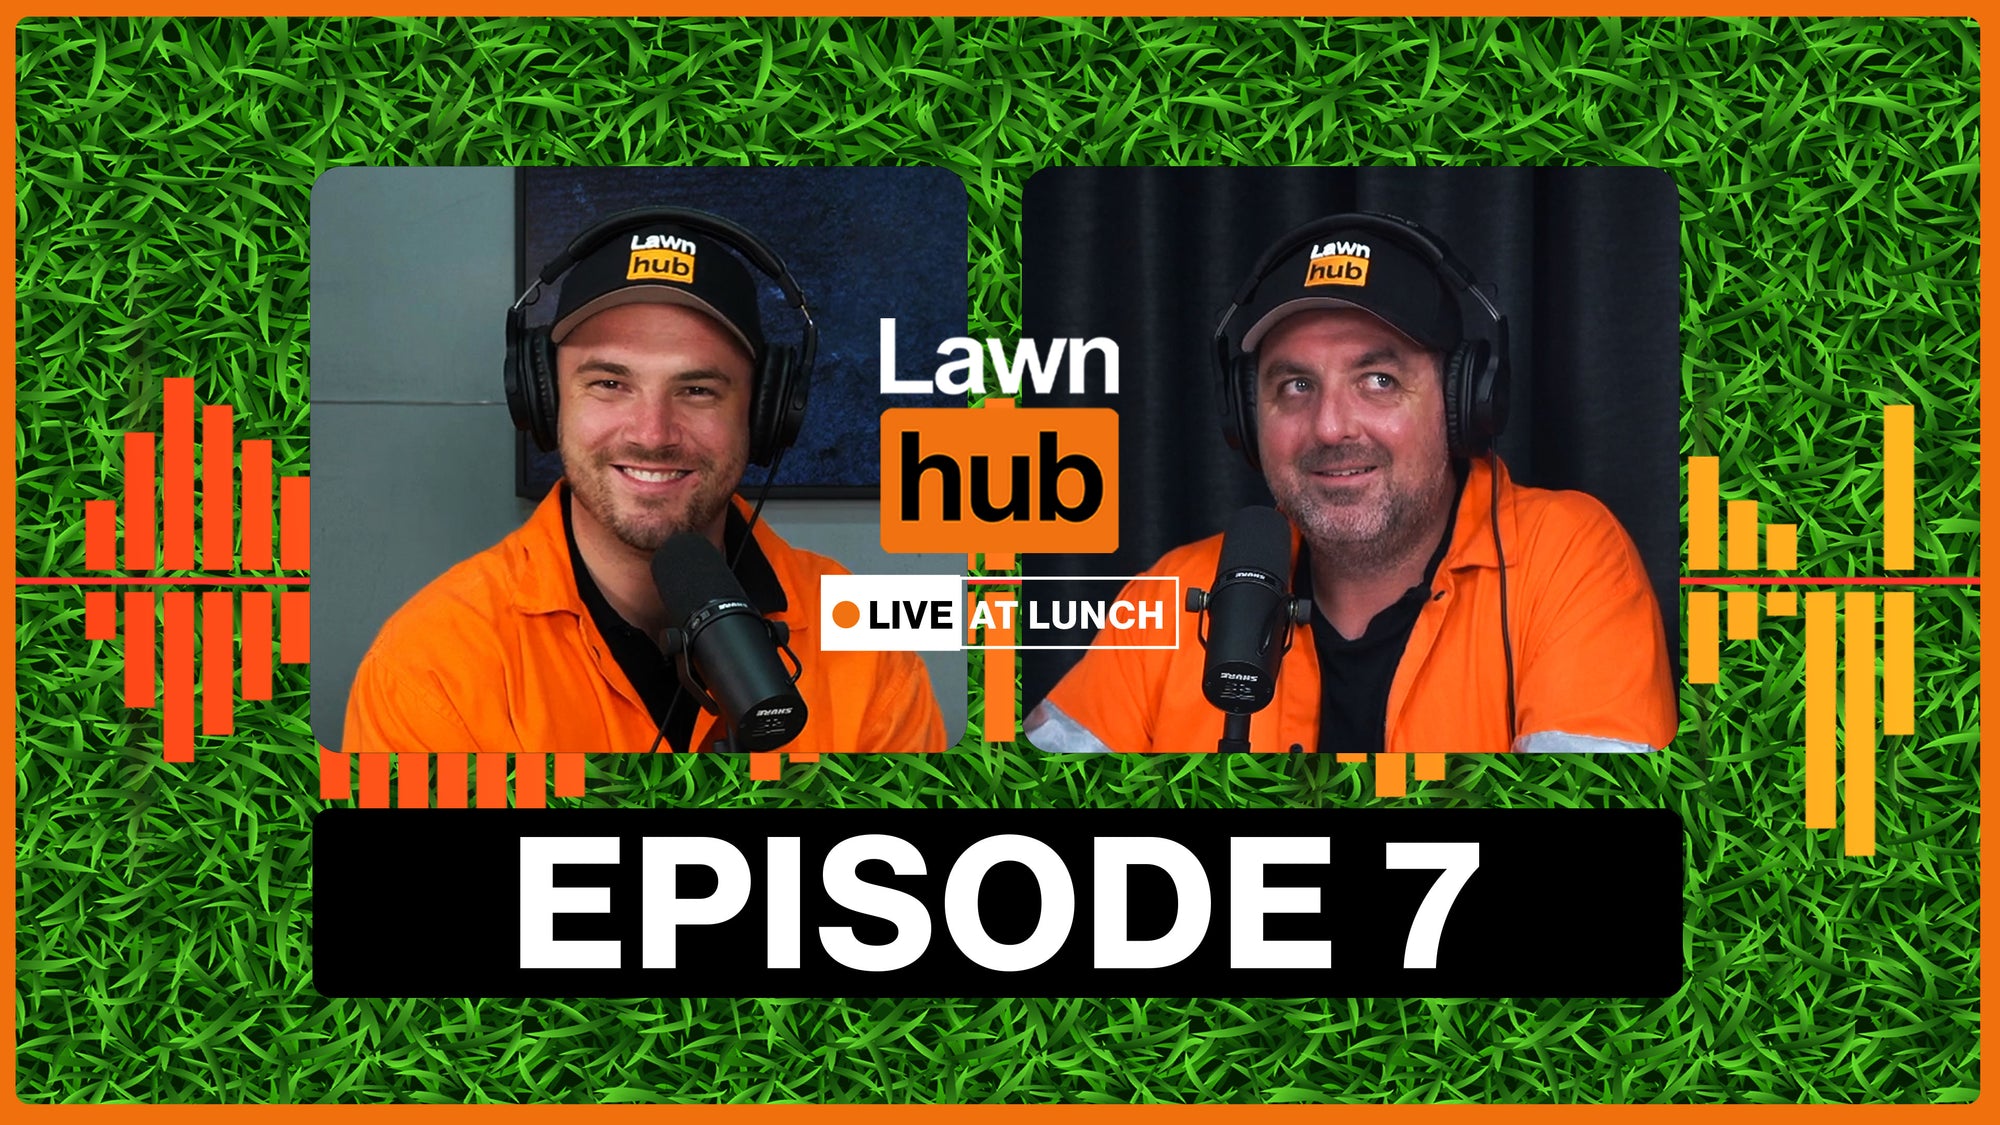 Watch Lawnhub Live at Lunch HERE